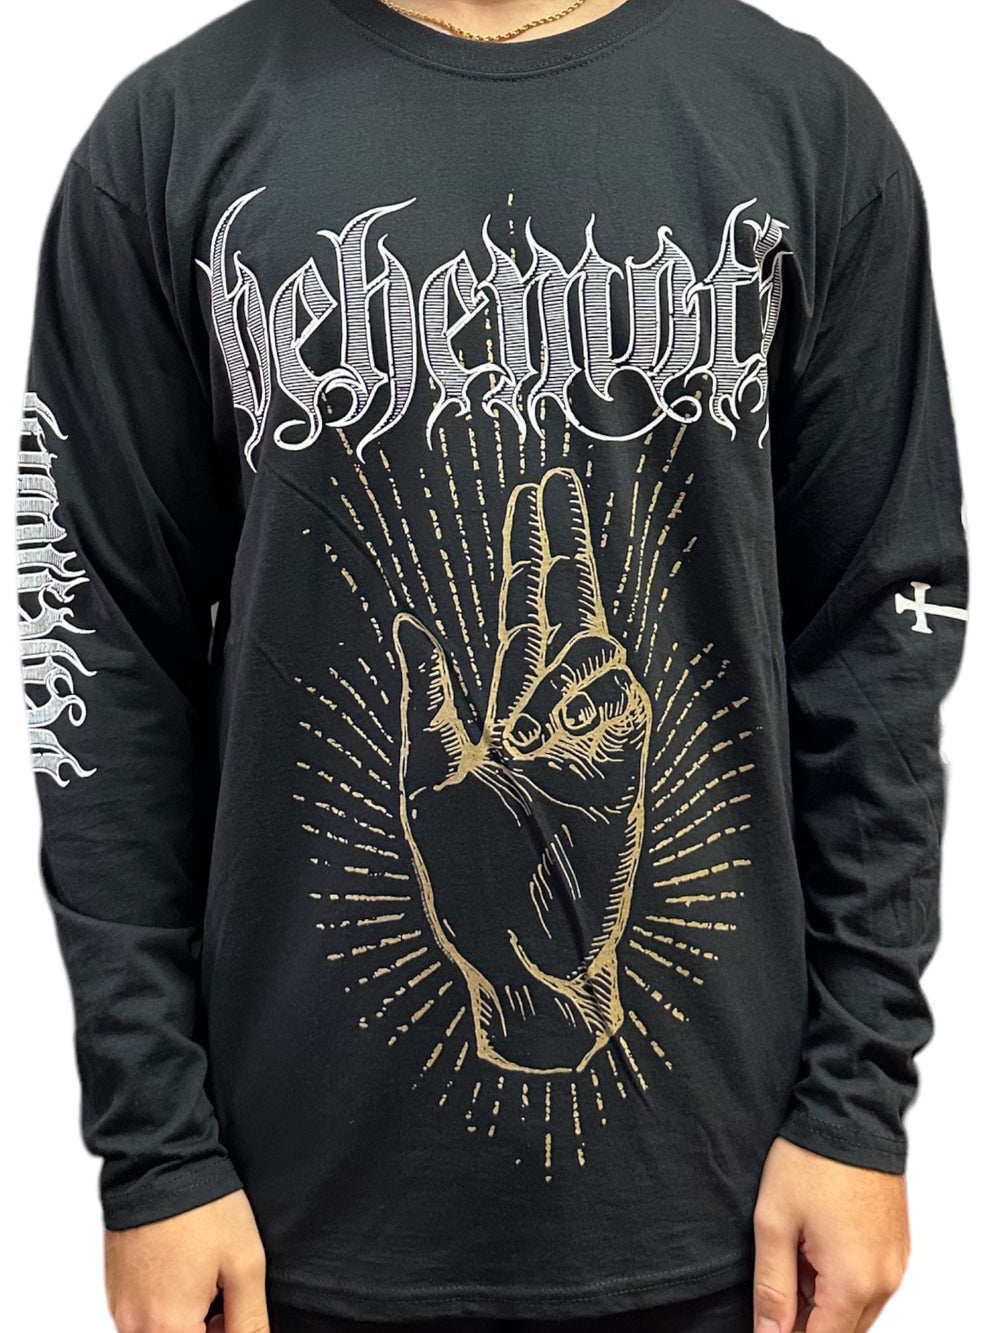 Behemoth Lucifer Official Unisex Long Sleeved Shirt Various Sizes Front & Back Print: NEW